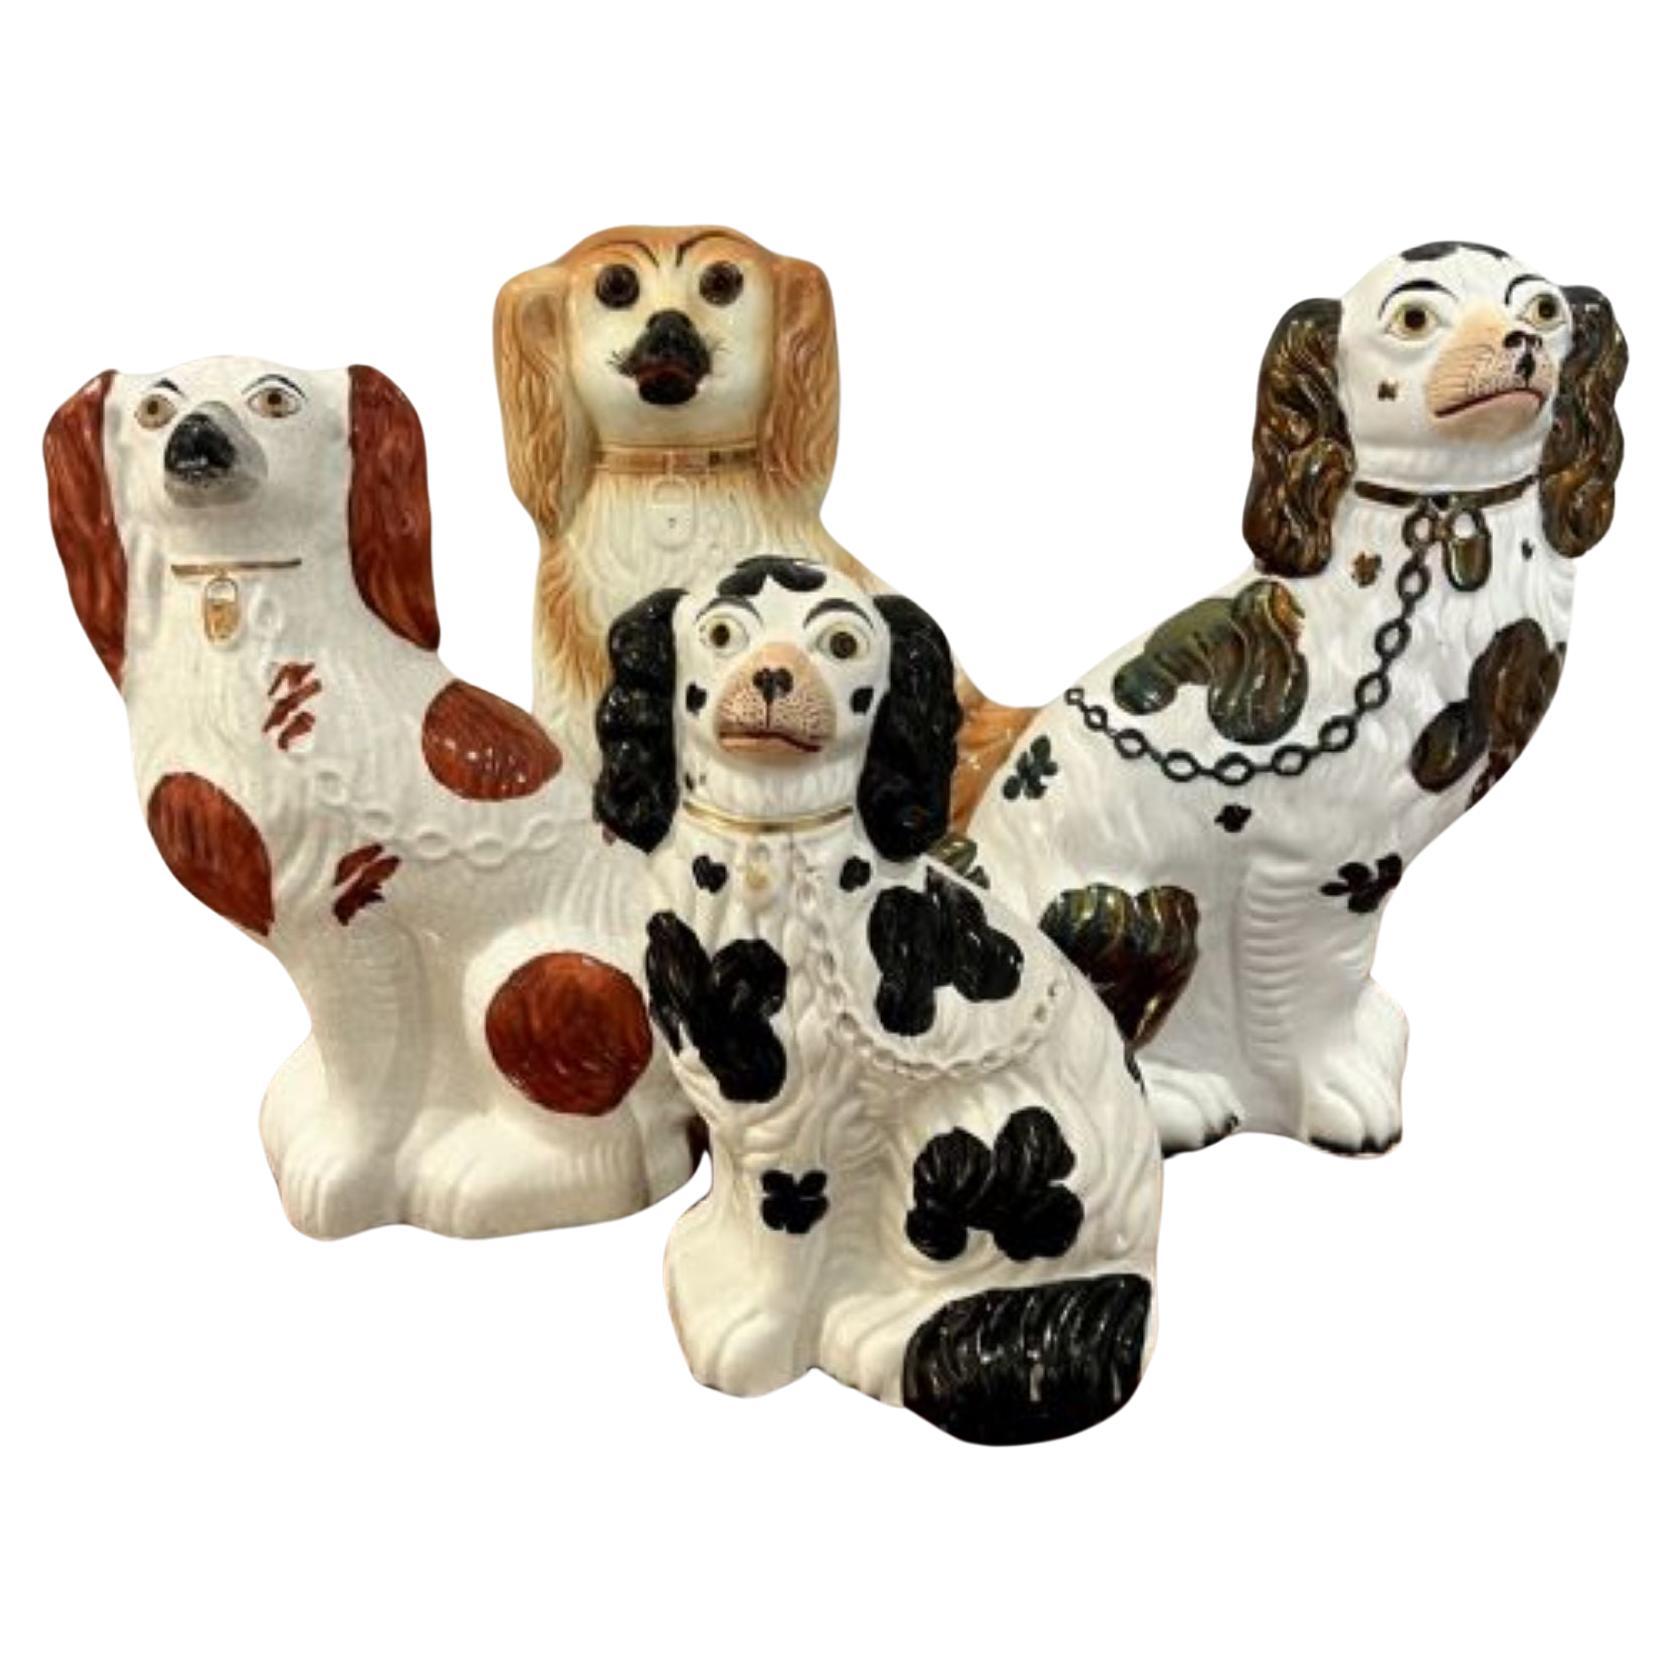 How can I tell if Staffordshire figurines are real?